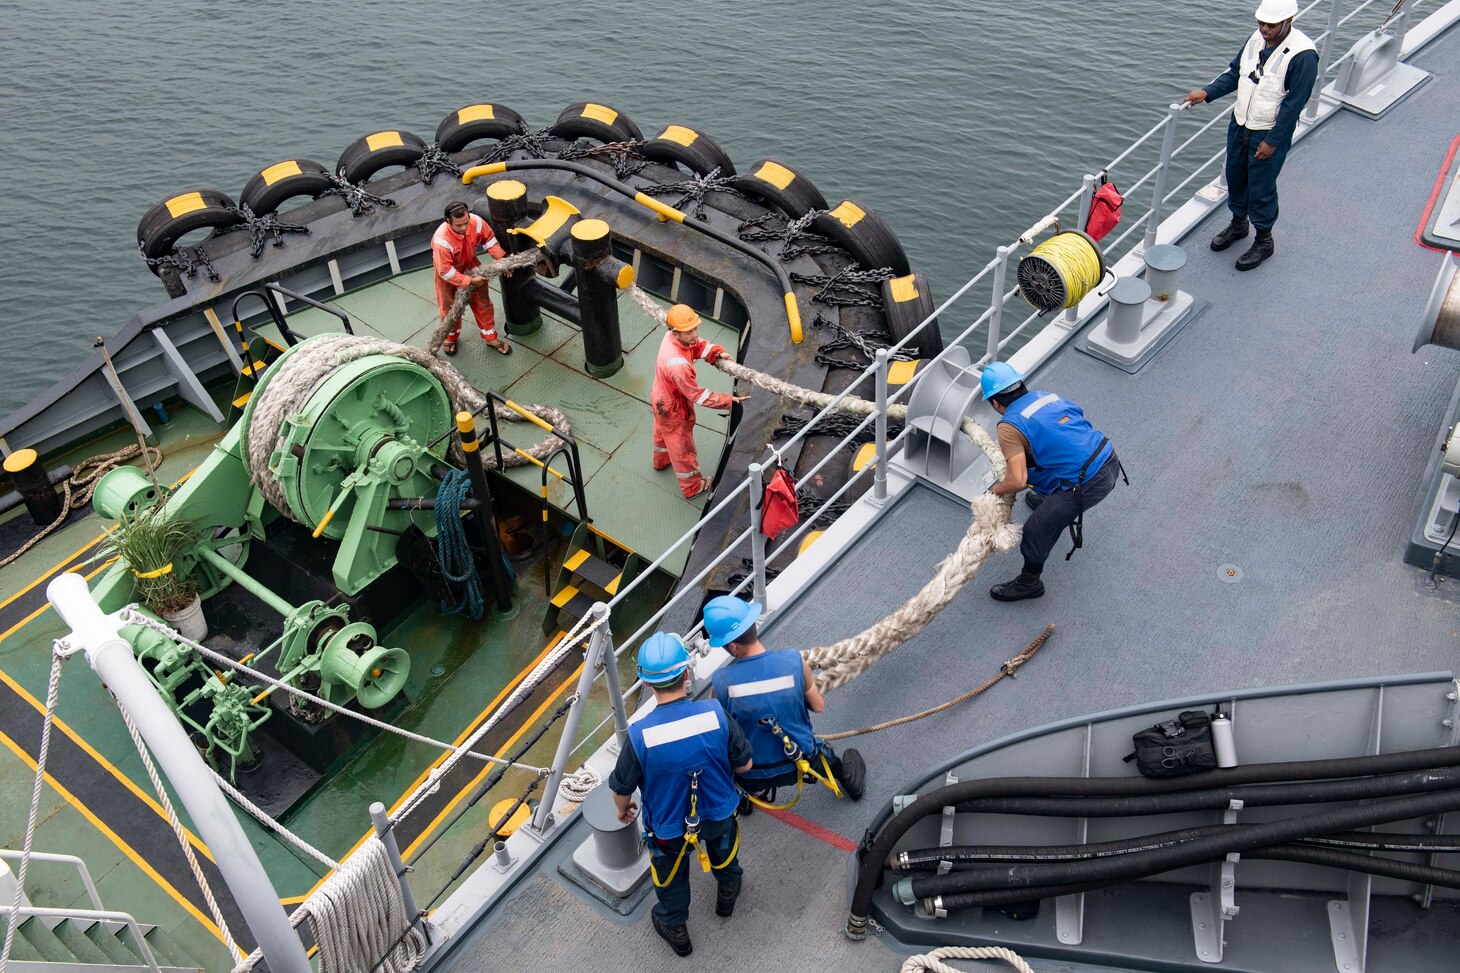 PUERTO PRINCESA, Republic of the Philippines (May 9, 2019) Sailors aboard the Avenger-class mine countermeasure ship USS Pioneer (MCM 9) attach lines from a tug while pulling into Puerto Princesa. Pioneer, part of Mine Countermeasures Squadron 7, is operating in the U.S. 7th Fleet area of operations to enhance interoperability with partners and serve as a ready-response platform for contingency operations.